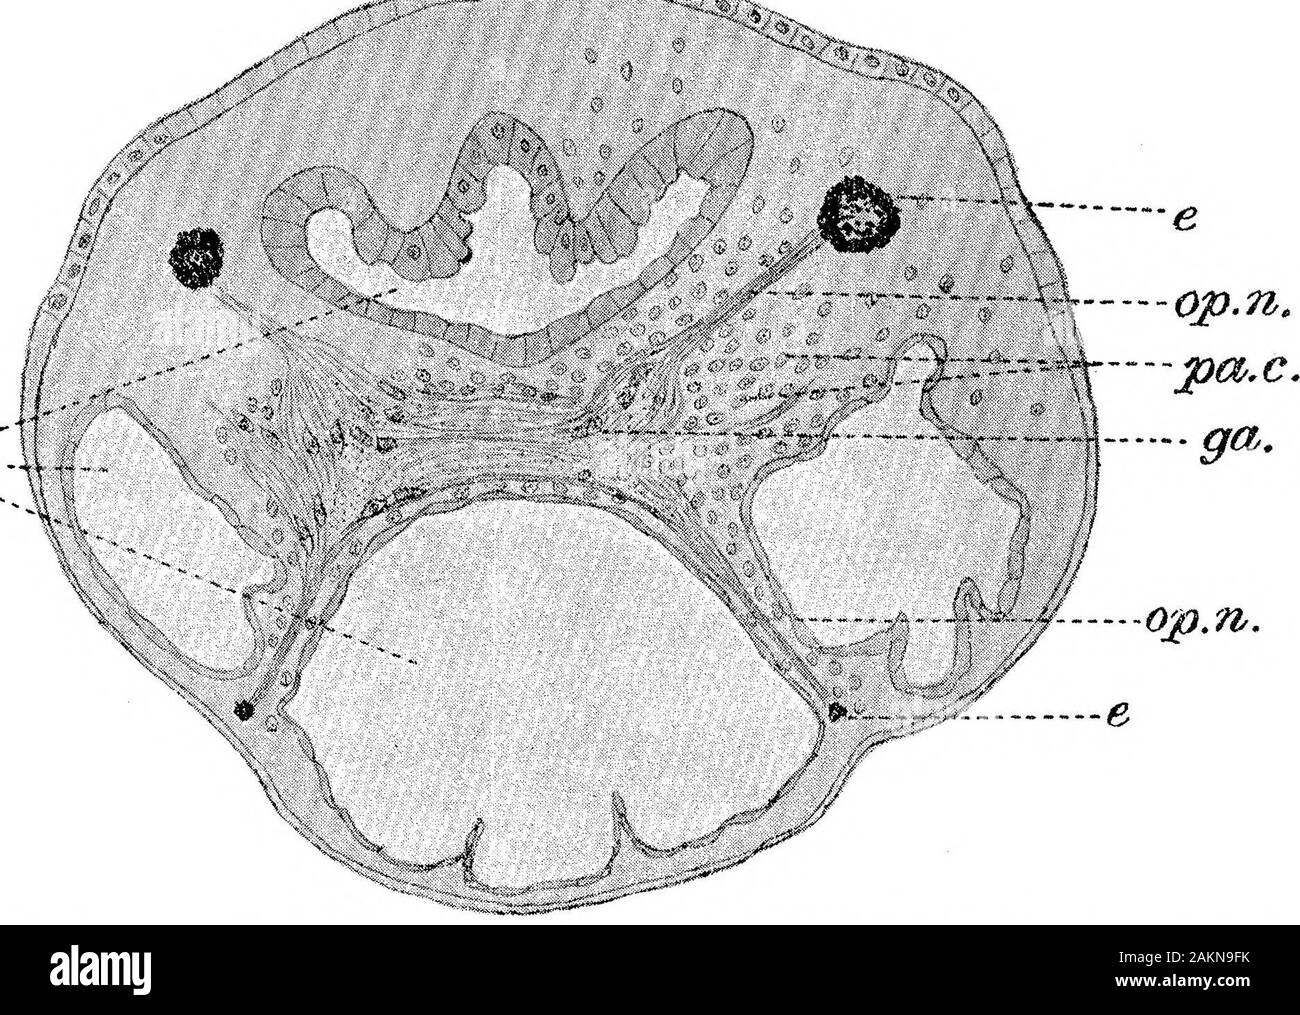 The Influence of the Position of the Cut upon Regeneration in Gunda Ulvae . ^^r-. ;e5.^. Fig. IX.—Section through IBEeteromorphic Head, 20 days (text-fig. IV, 8). e., eye ; (/., gut; ga., ganglion : op.n.^ optic nerve ; pa.c, parenchyma cells. IV. Discussion.As was mentioned earlier in the paper, Child (1) has already shownthat the presence of at least half the cerebral ganglia is necessary forcomplete regeneration in Leptoplancc. The removal of more than half VOL. LXXXVII.—B. 2 E 364 Miss D. J. Lloyd. Influence of the Position of the the ganglia causes the production of defective heads. When Stock Photo